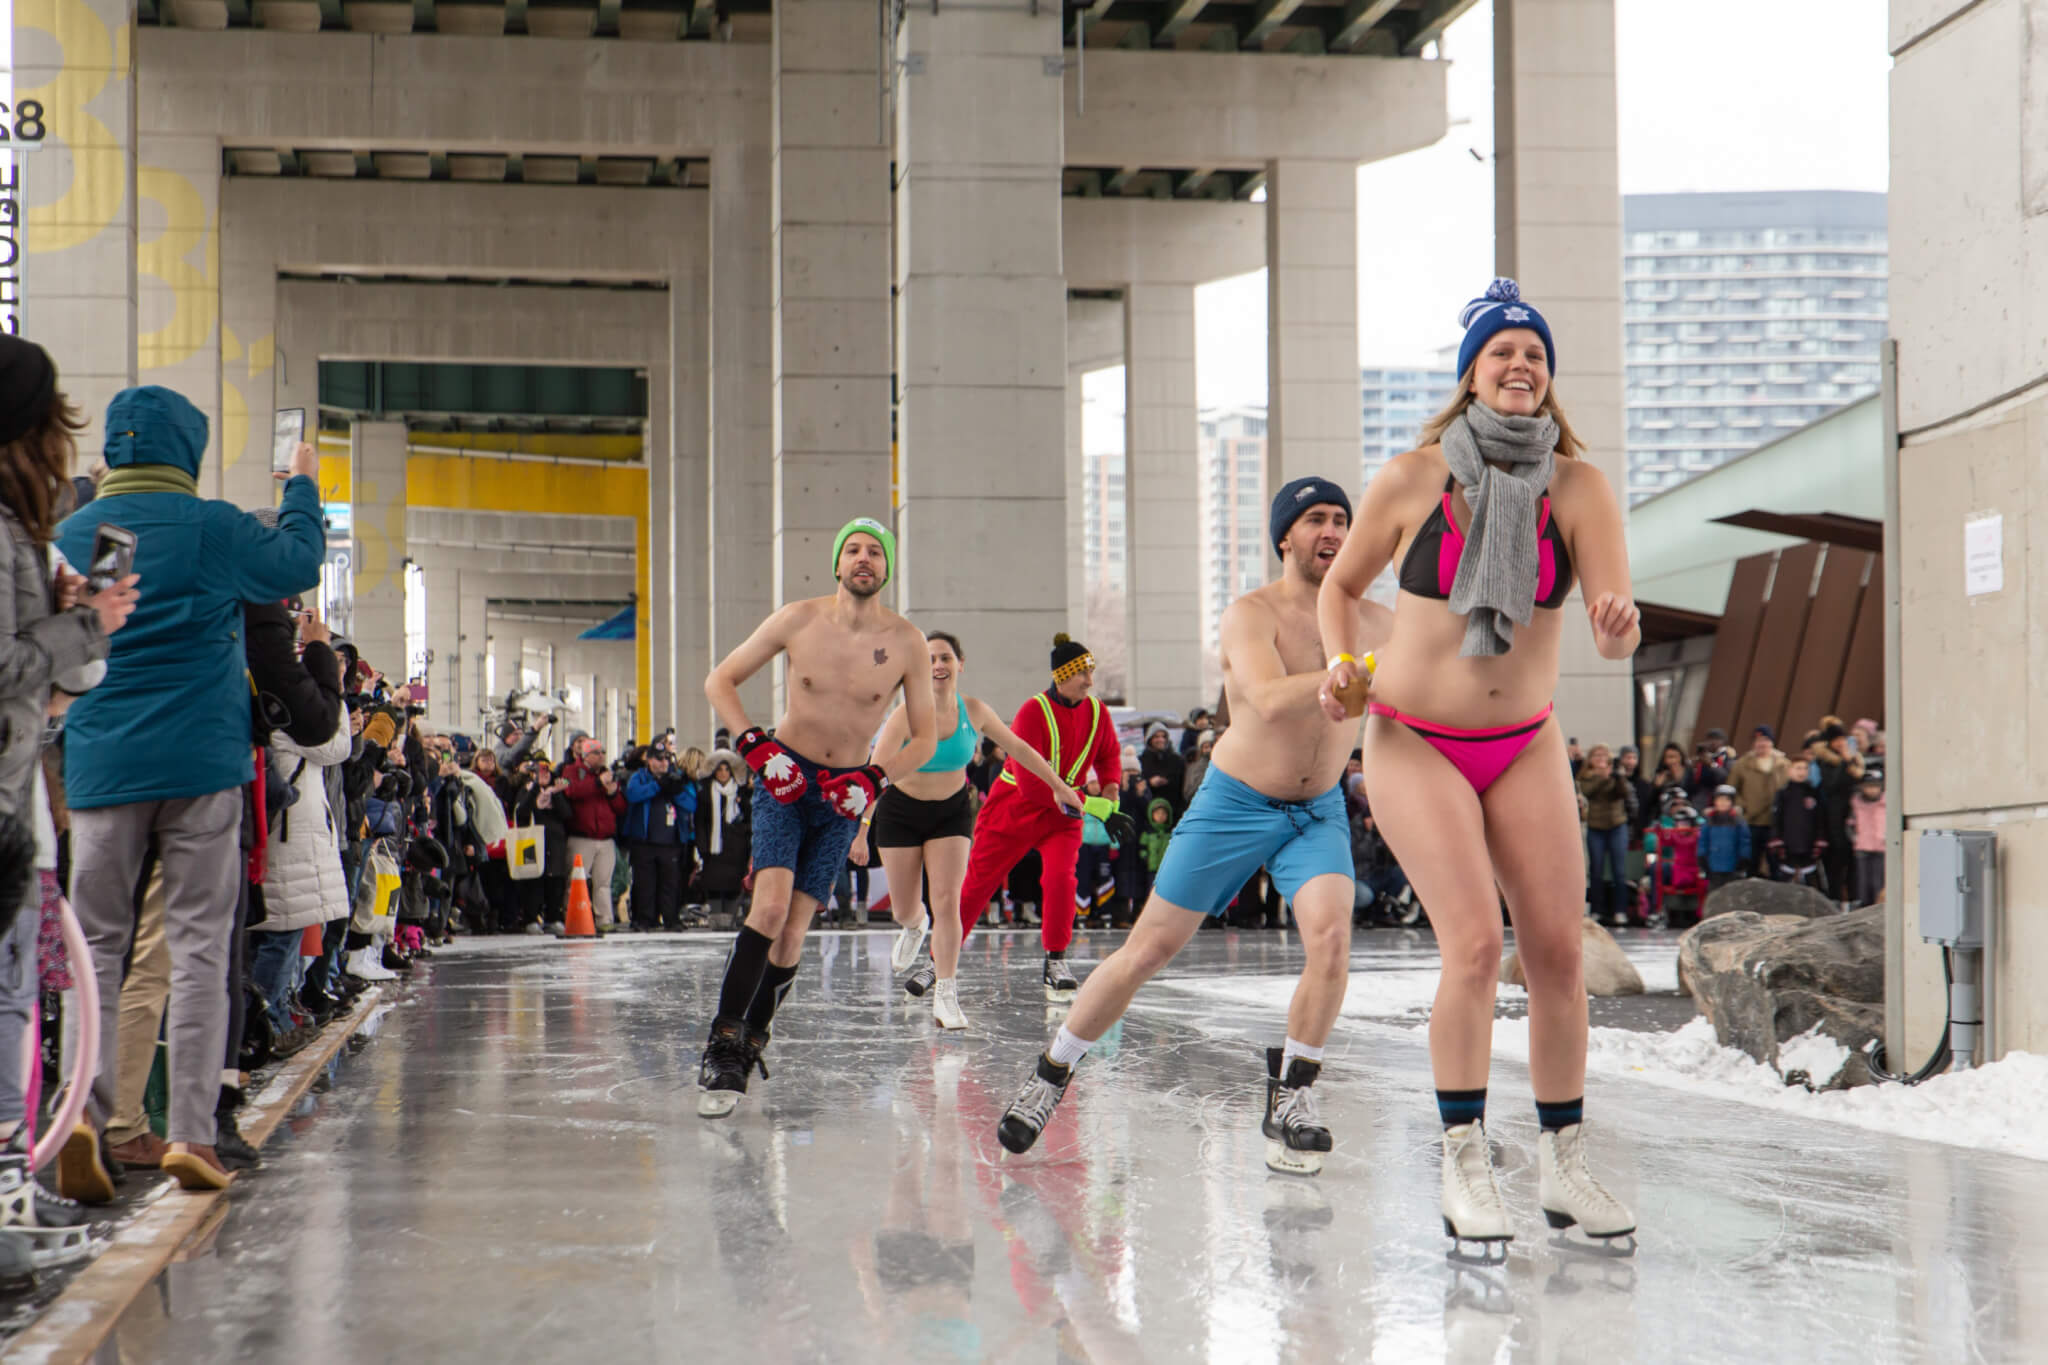 people in underpants ice skate on an outdoor trail